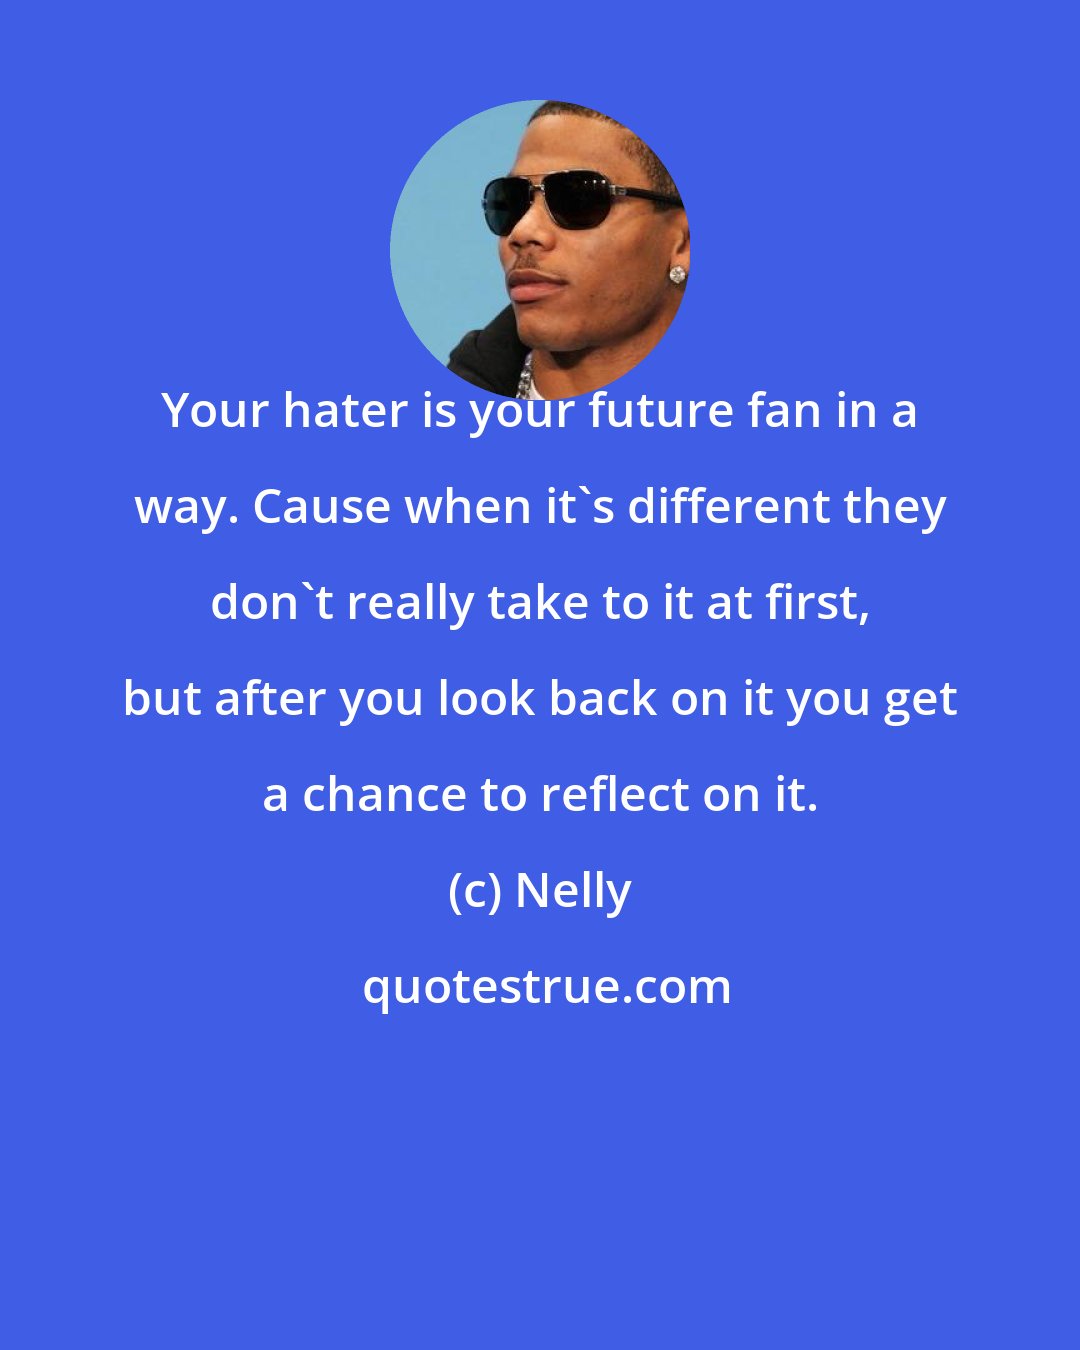 Nelly: Your hater is your future fan in a way. Cause when it's different they don't really take to it at first, but after you look back on it you get a chance to reflect on it.